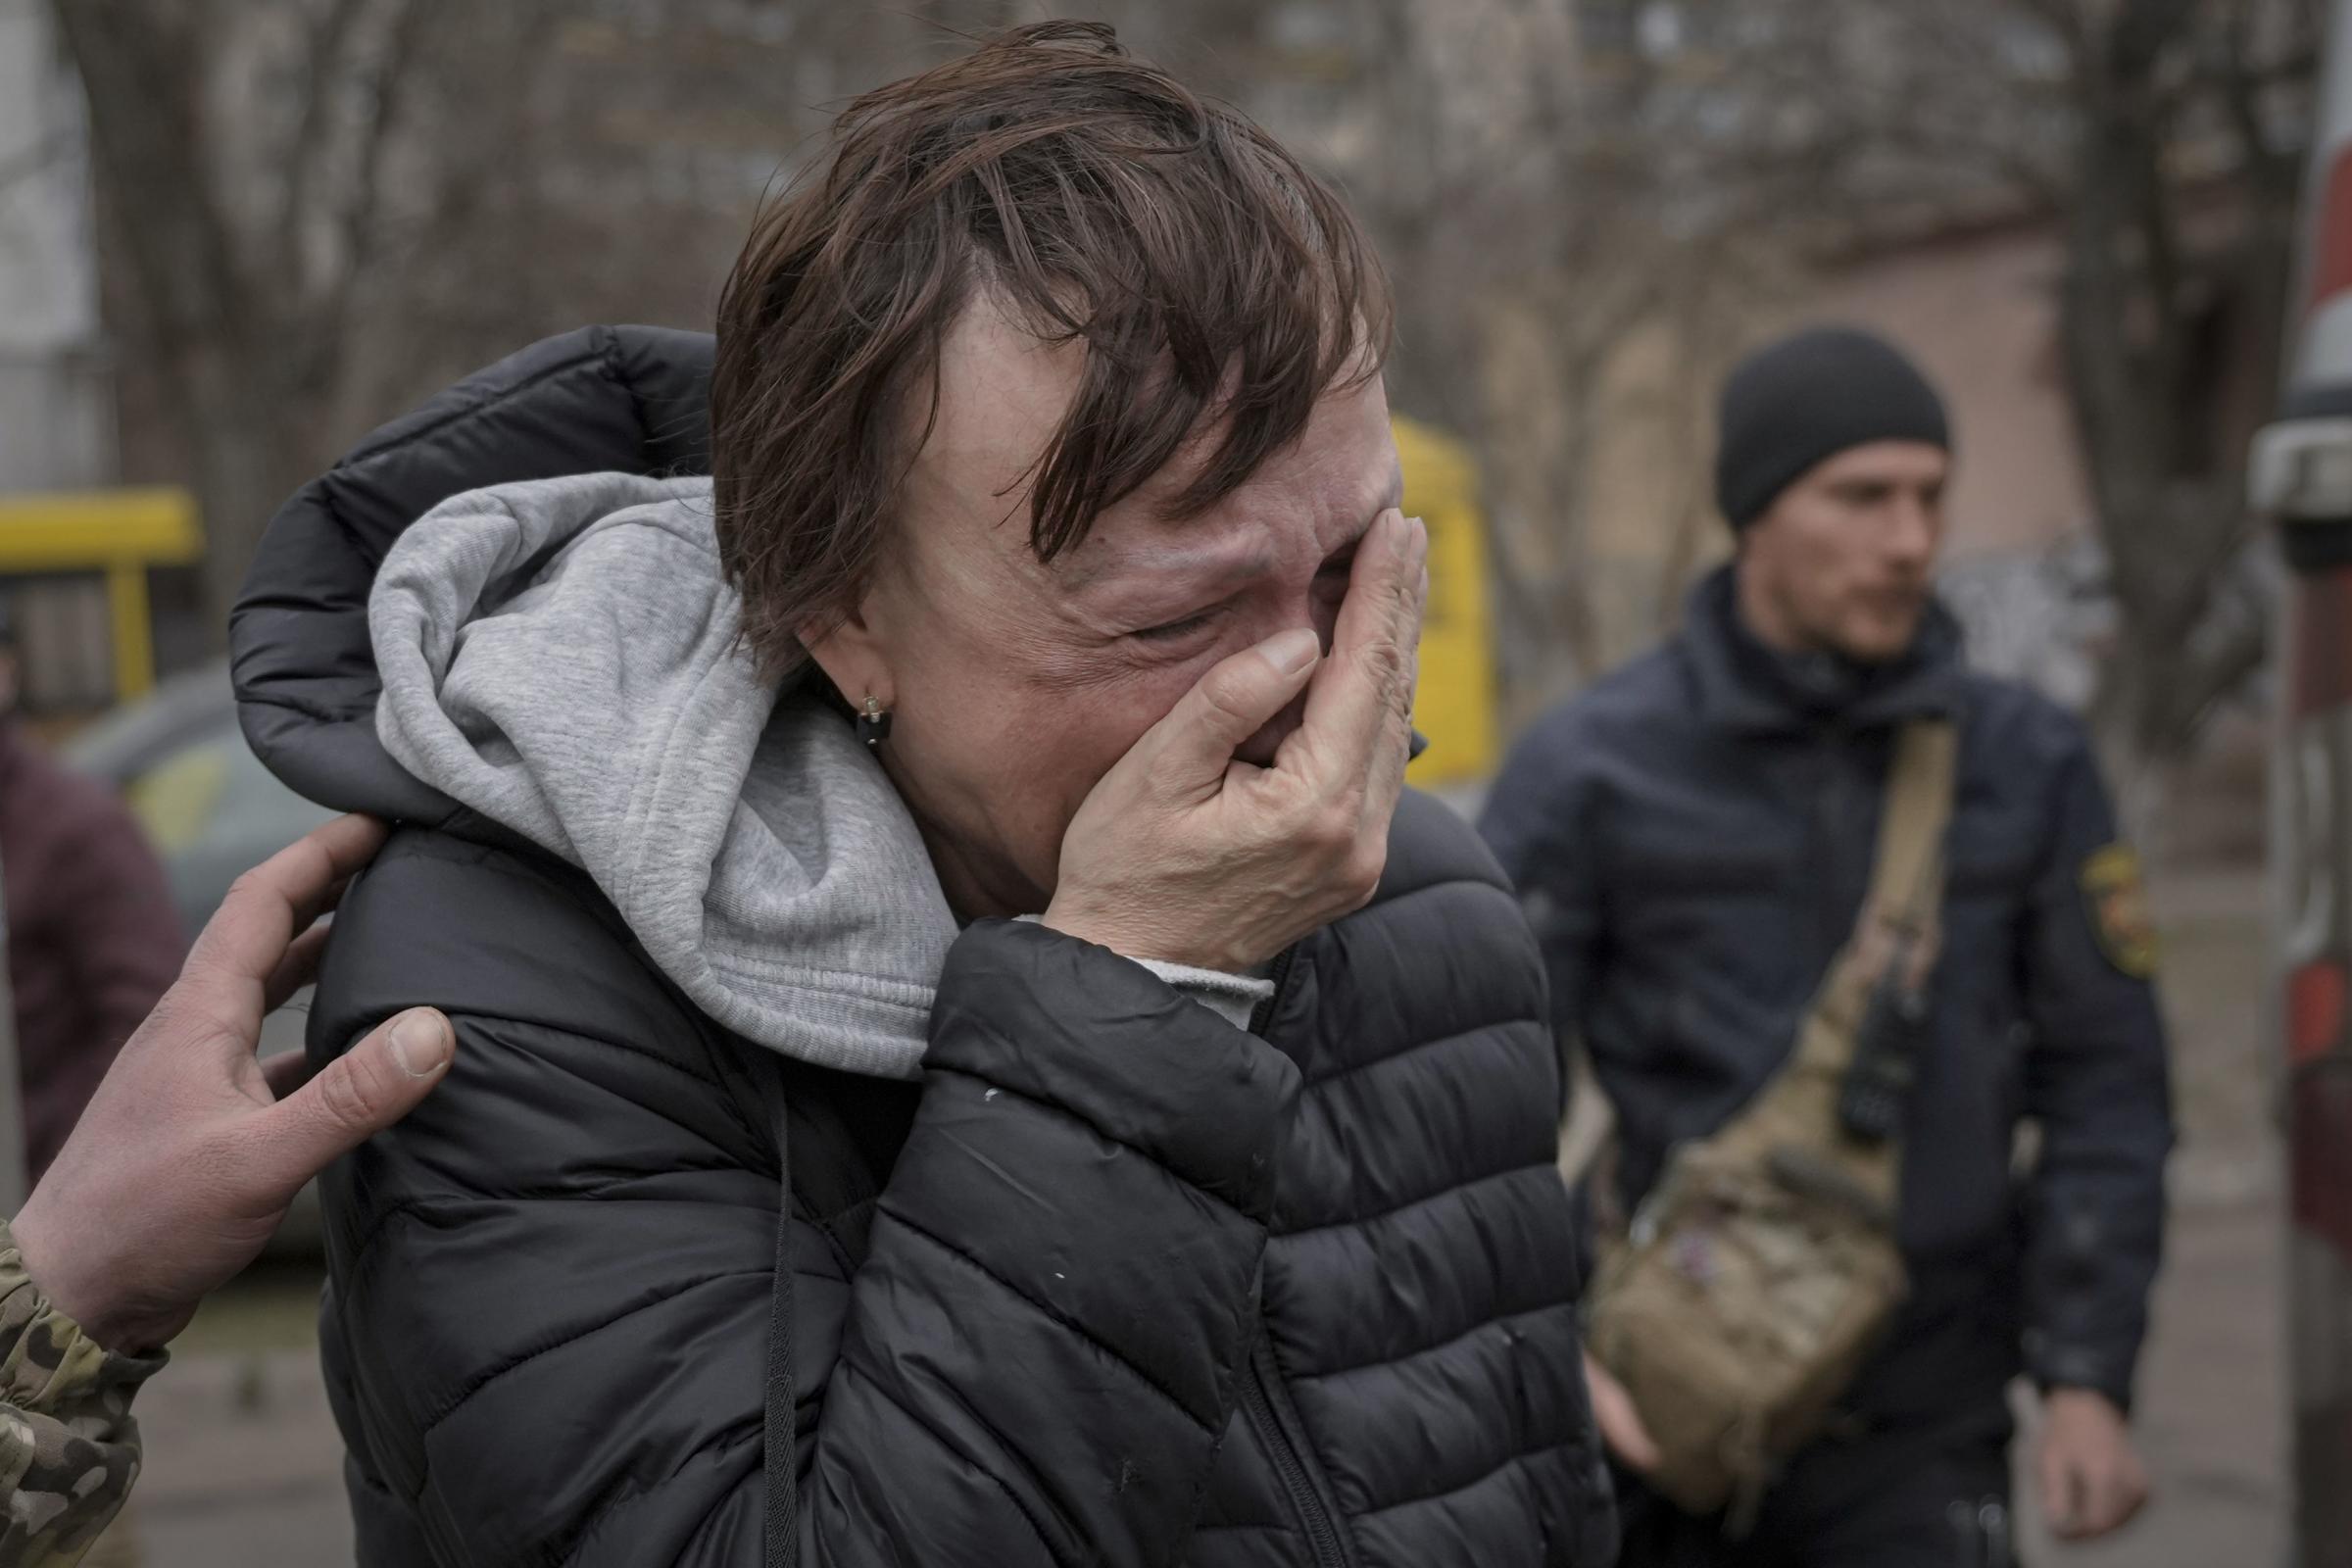 A woman evacuated from Irpin cries as she arrives on the outskirts of Kyiv, Ukraine.